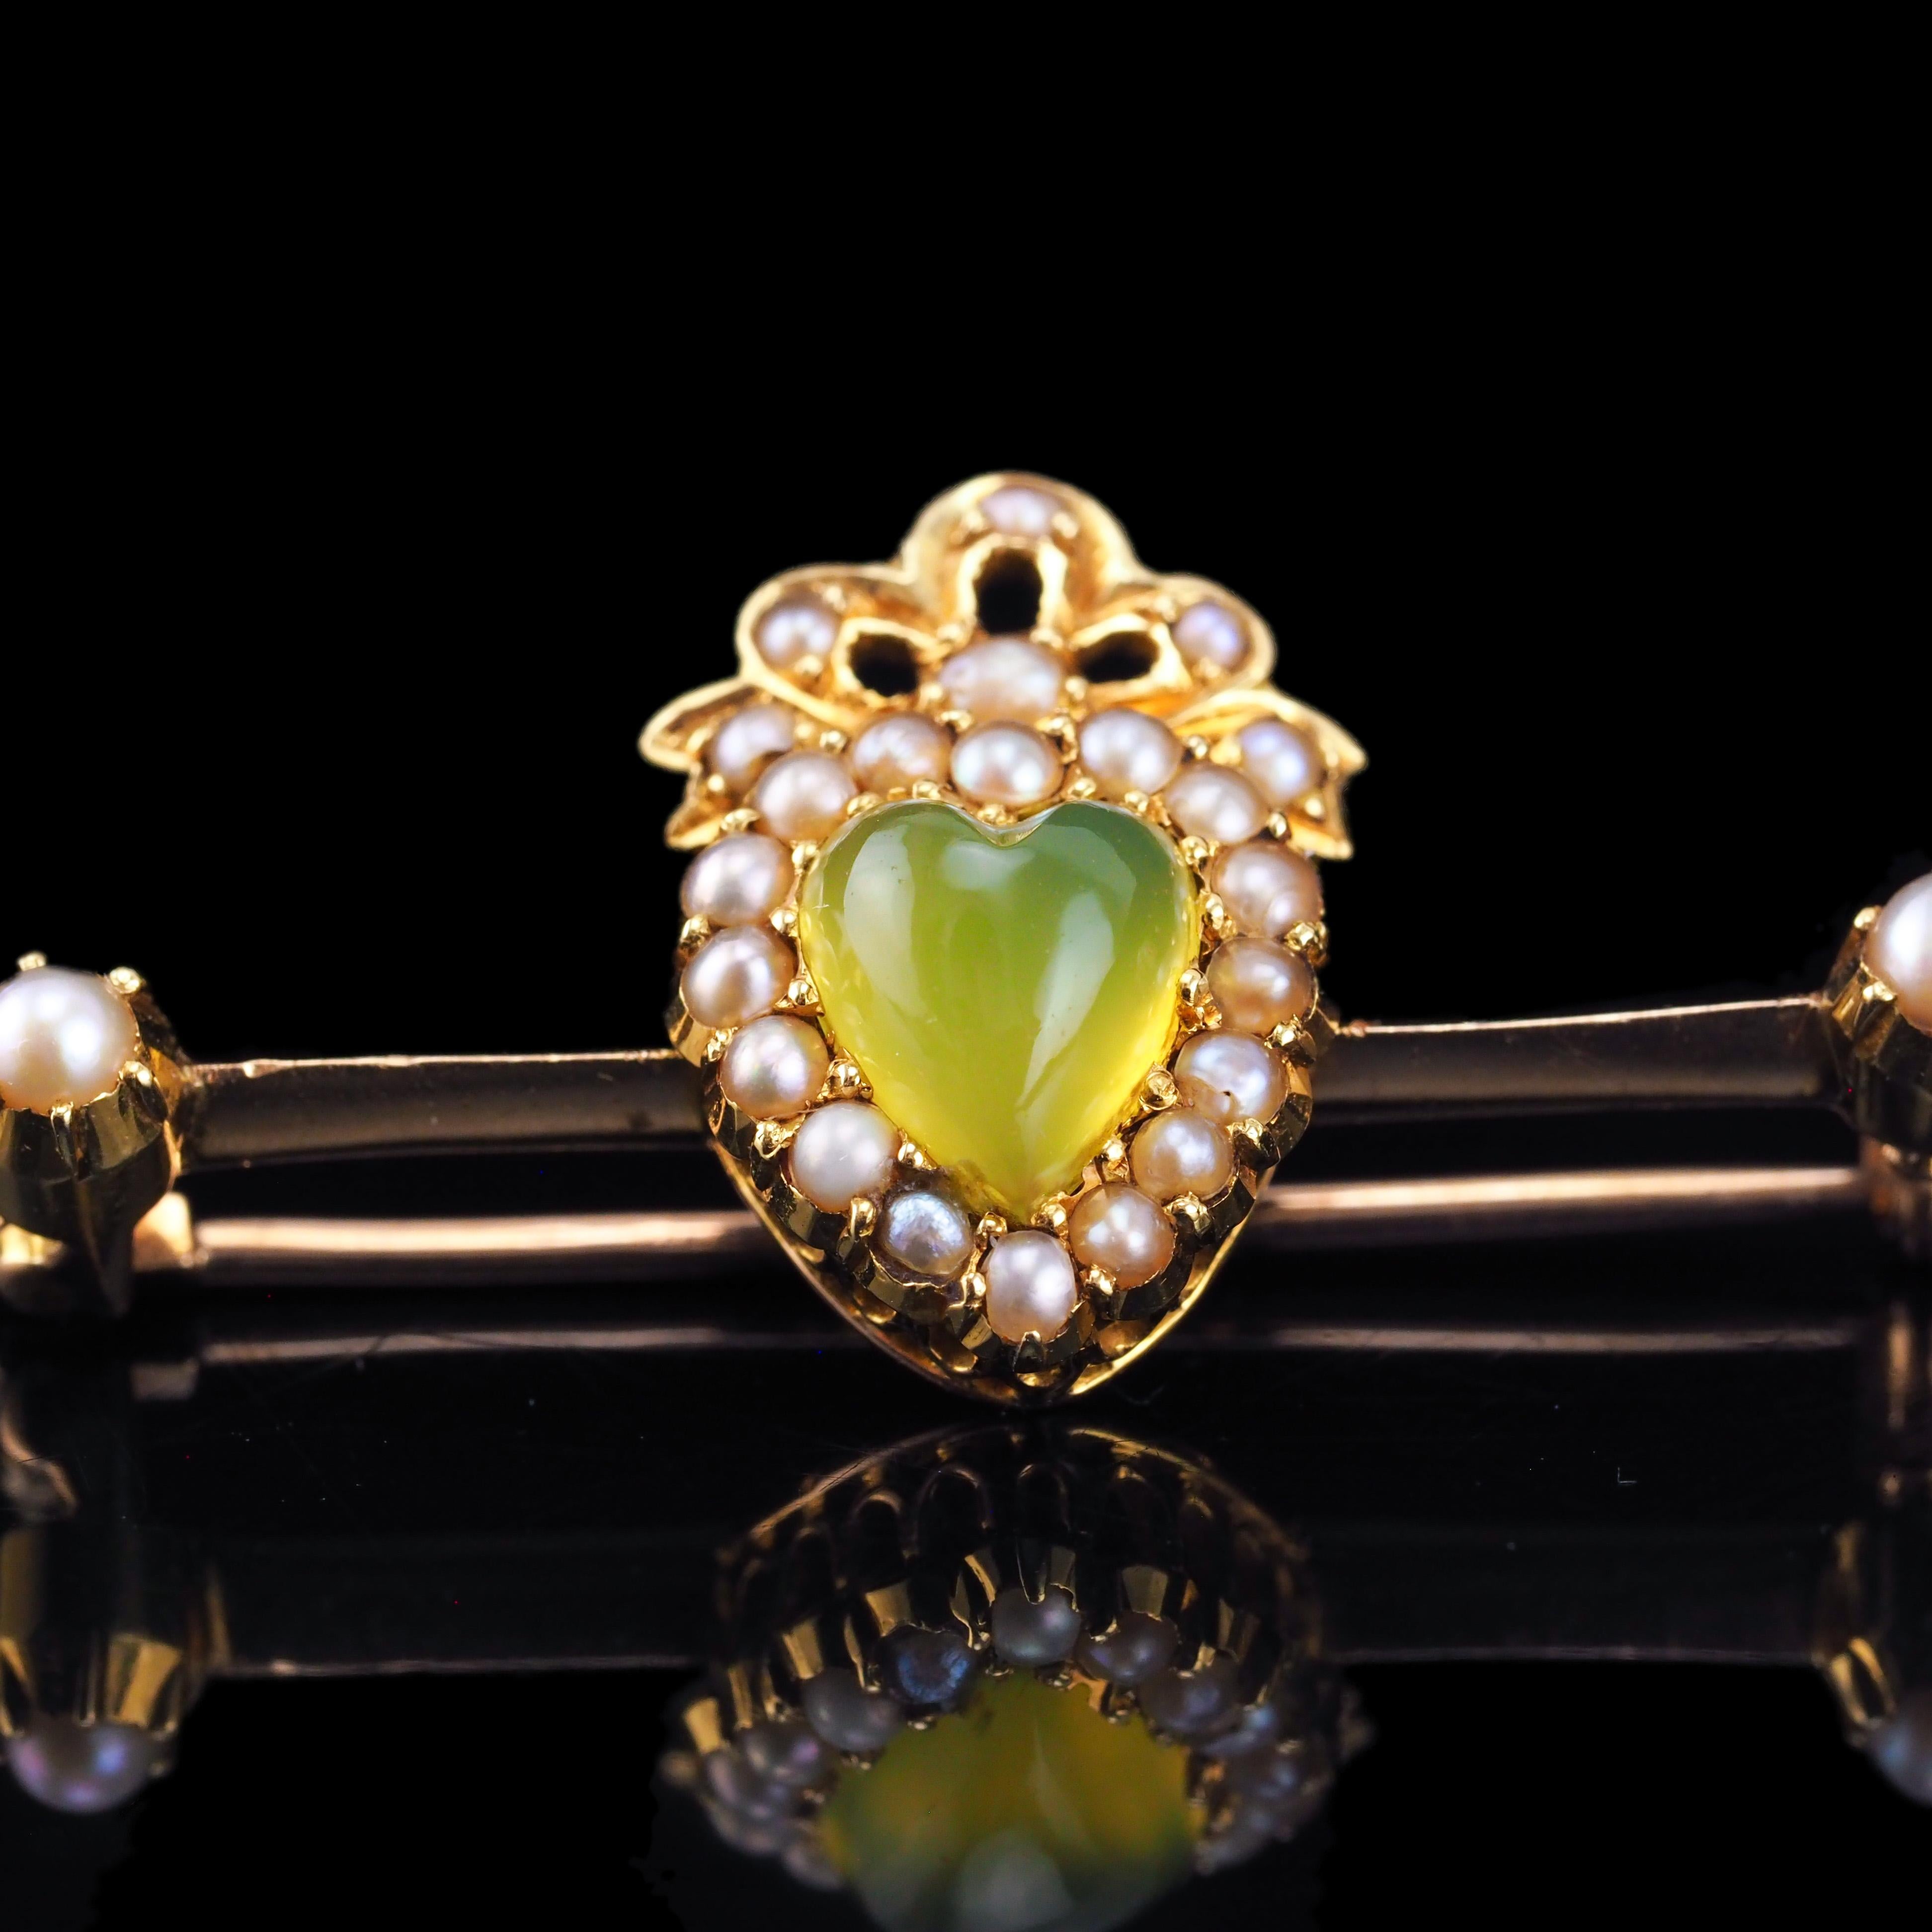 Antique Victorian Chalcedony Brooch  Seed Pearls 15K Gold Heart Shaped c.1890 For Sale 1